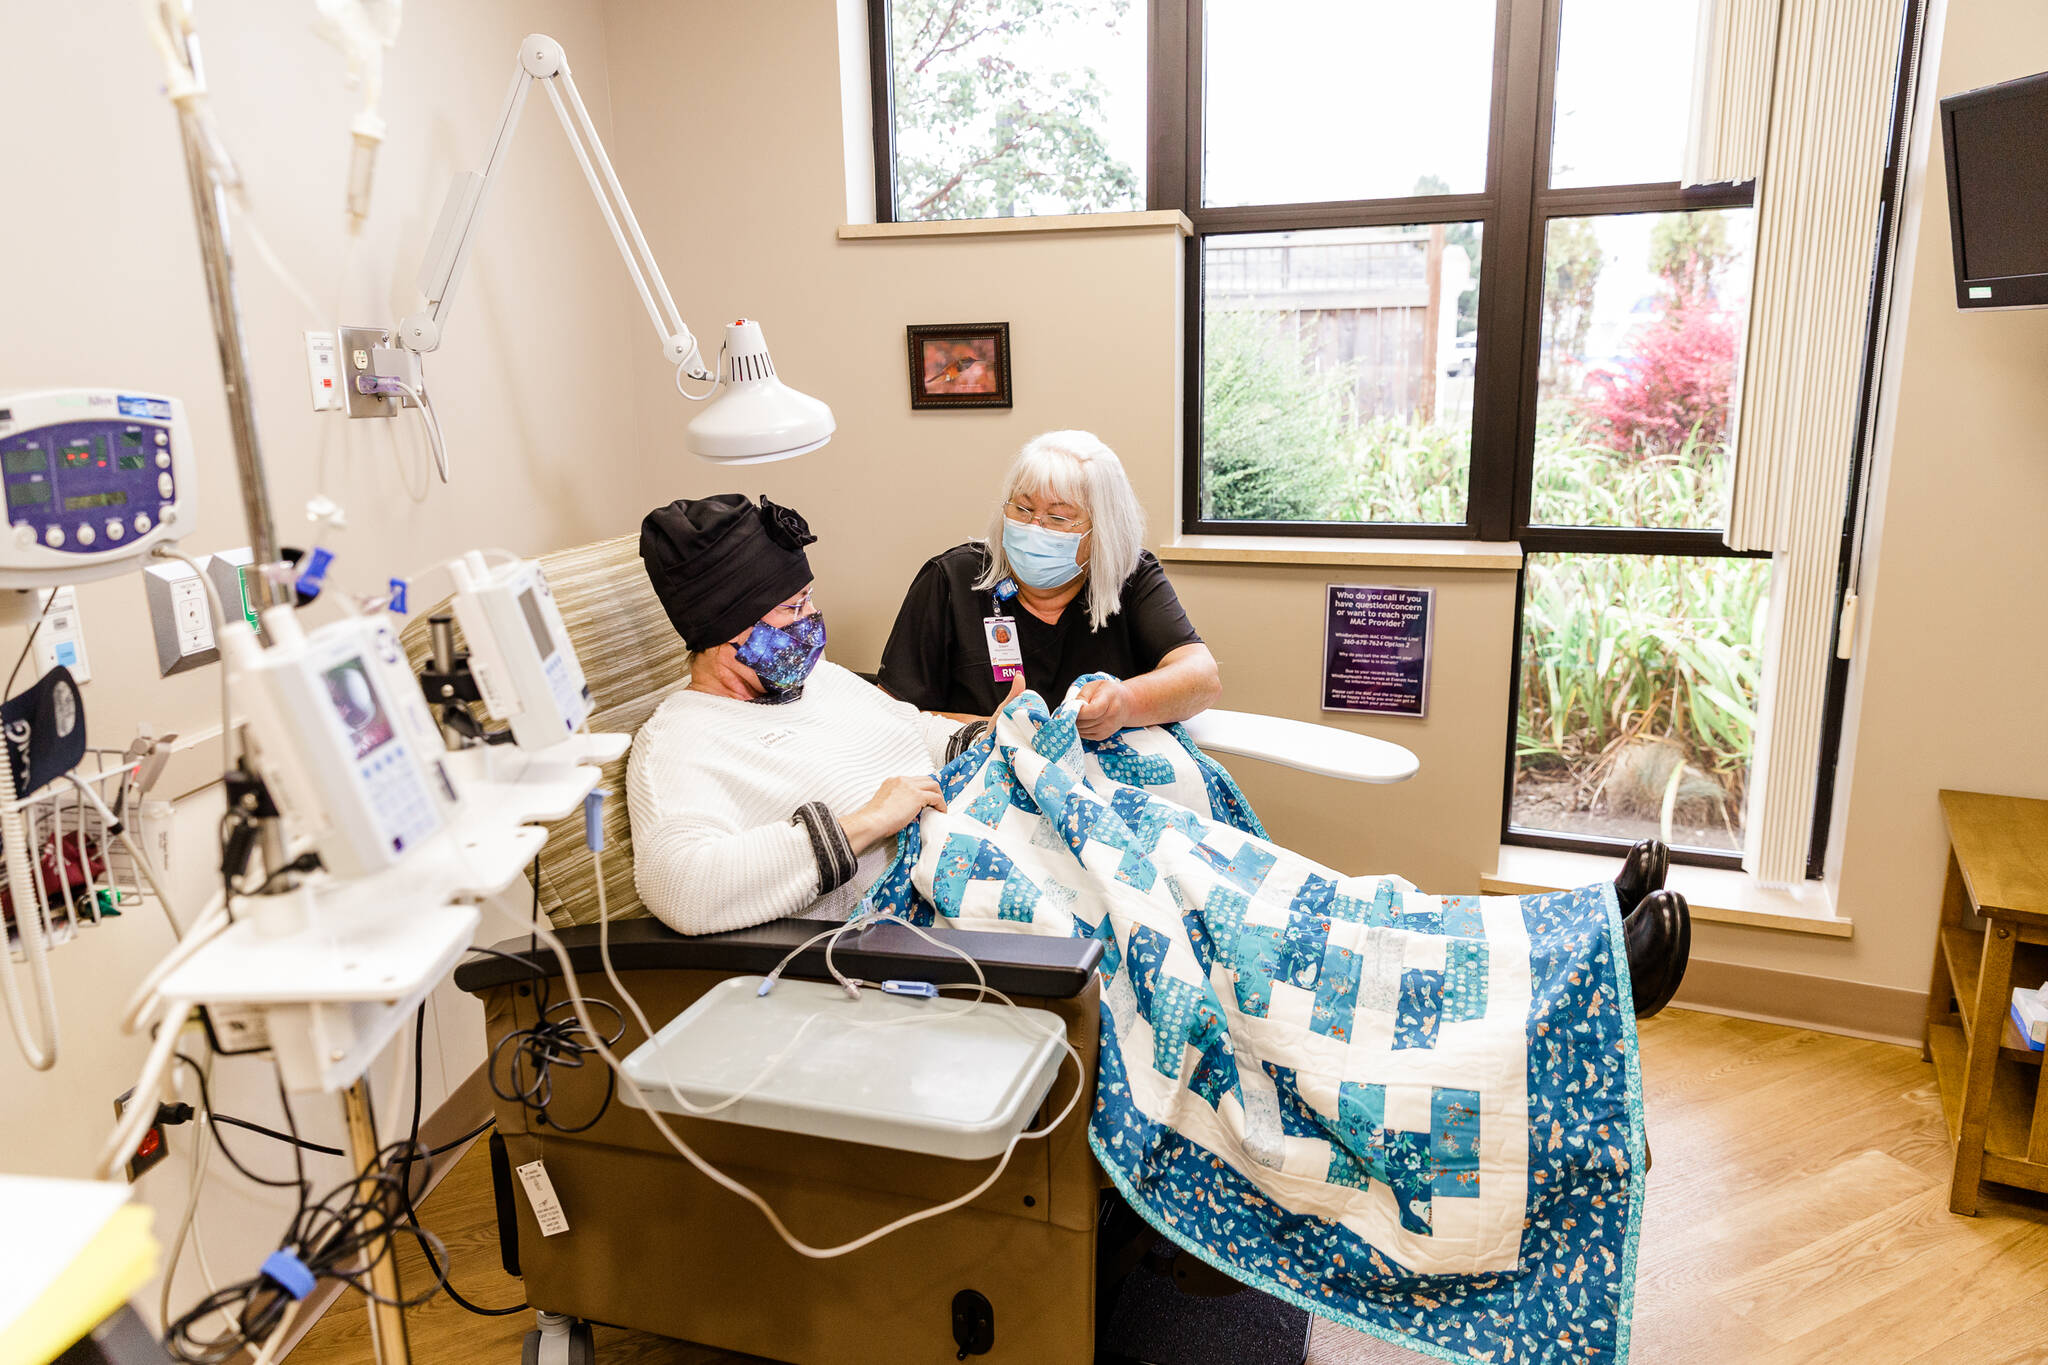 Photo provided
Dawn Sellgren, RN, cares for a patient at WhidbeyHealth Cancer Care.